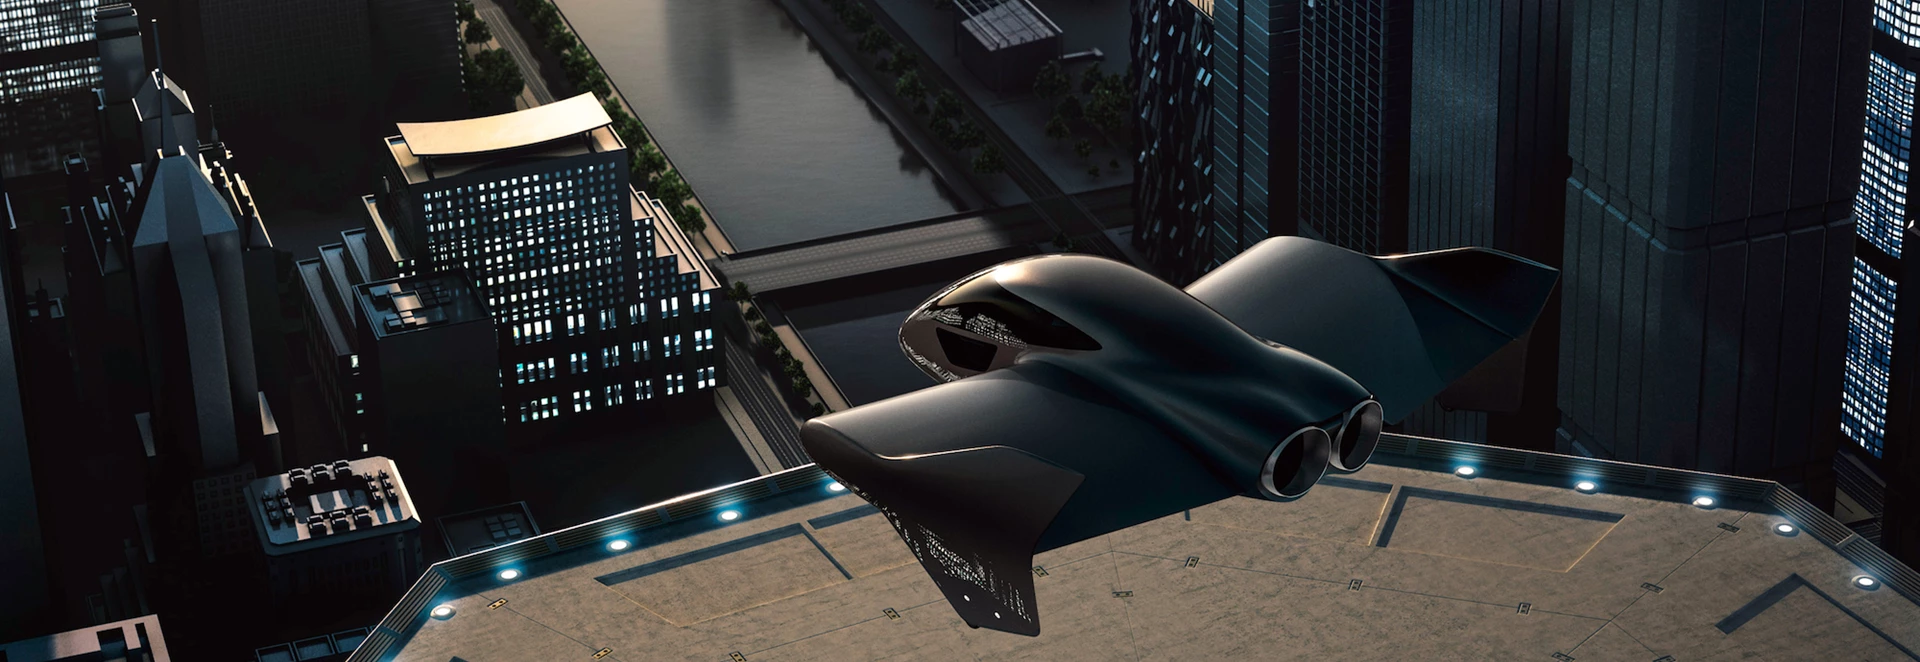 Boeing and Porsche are teaming up on a flying car